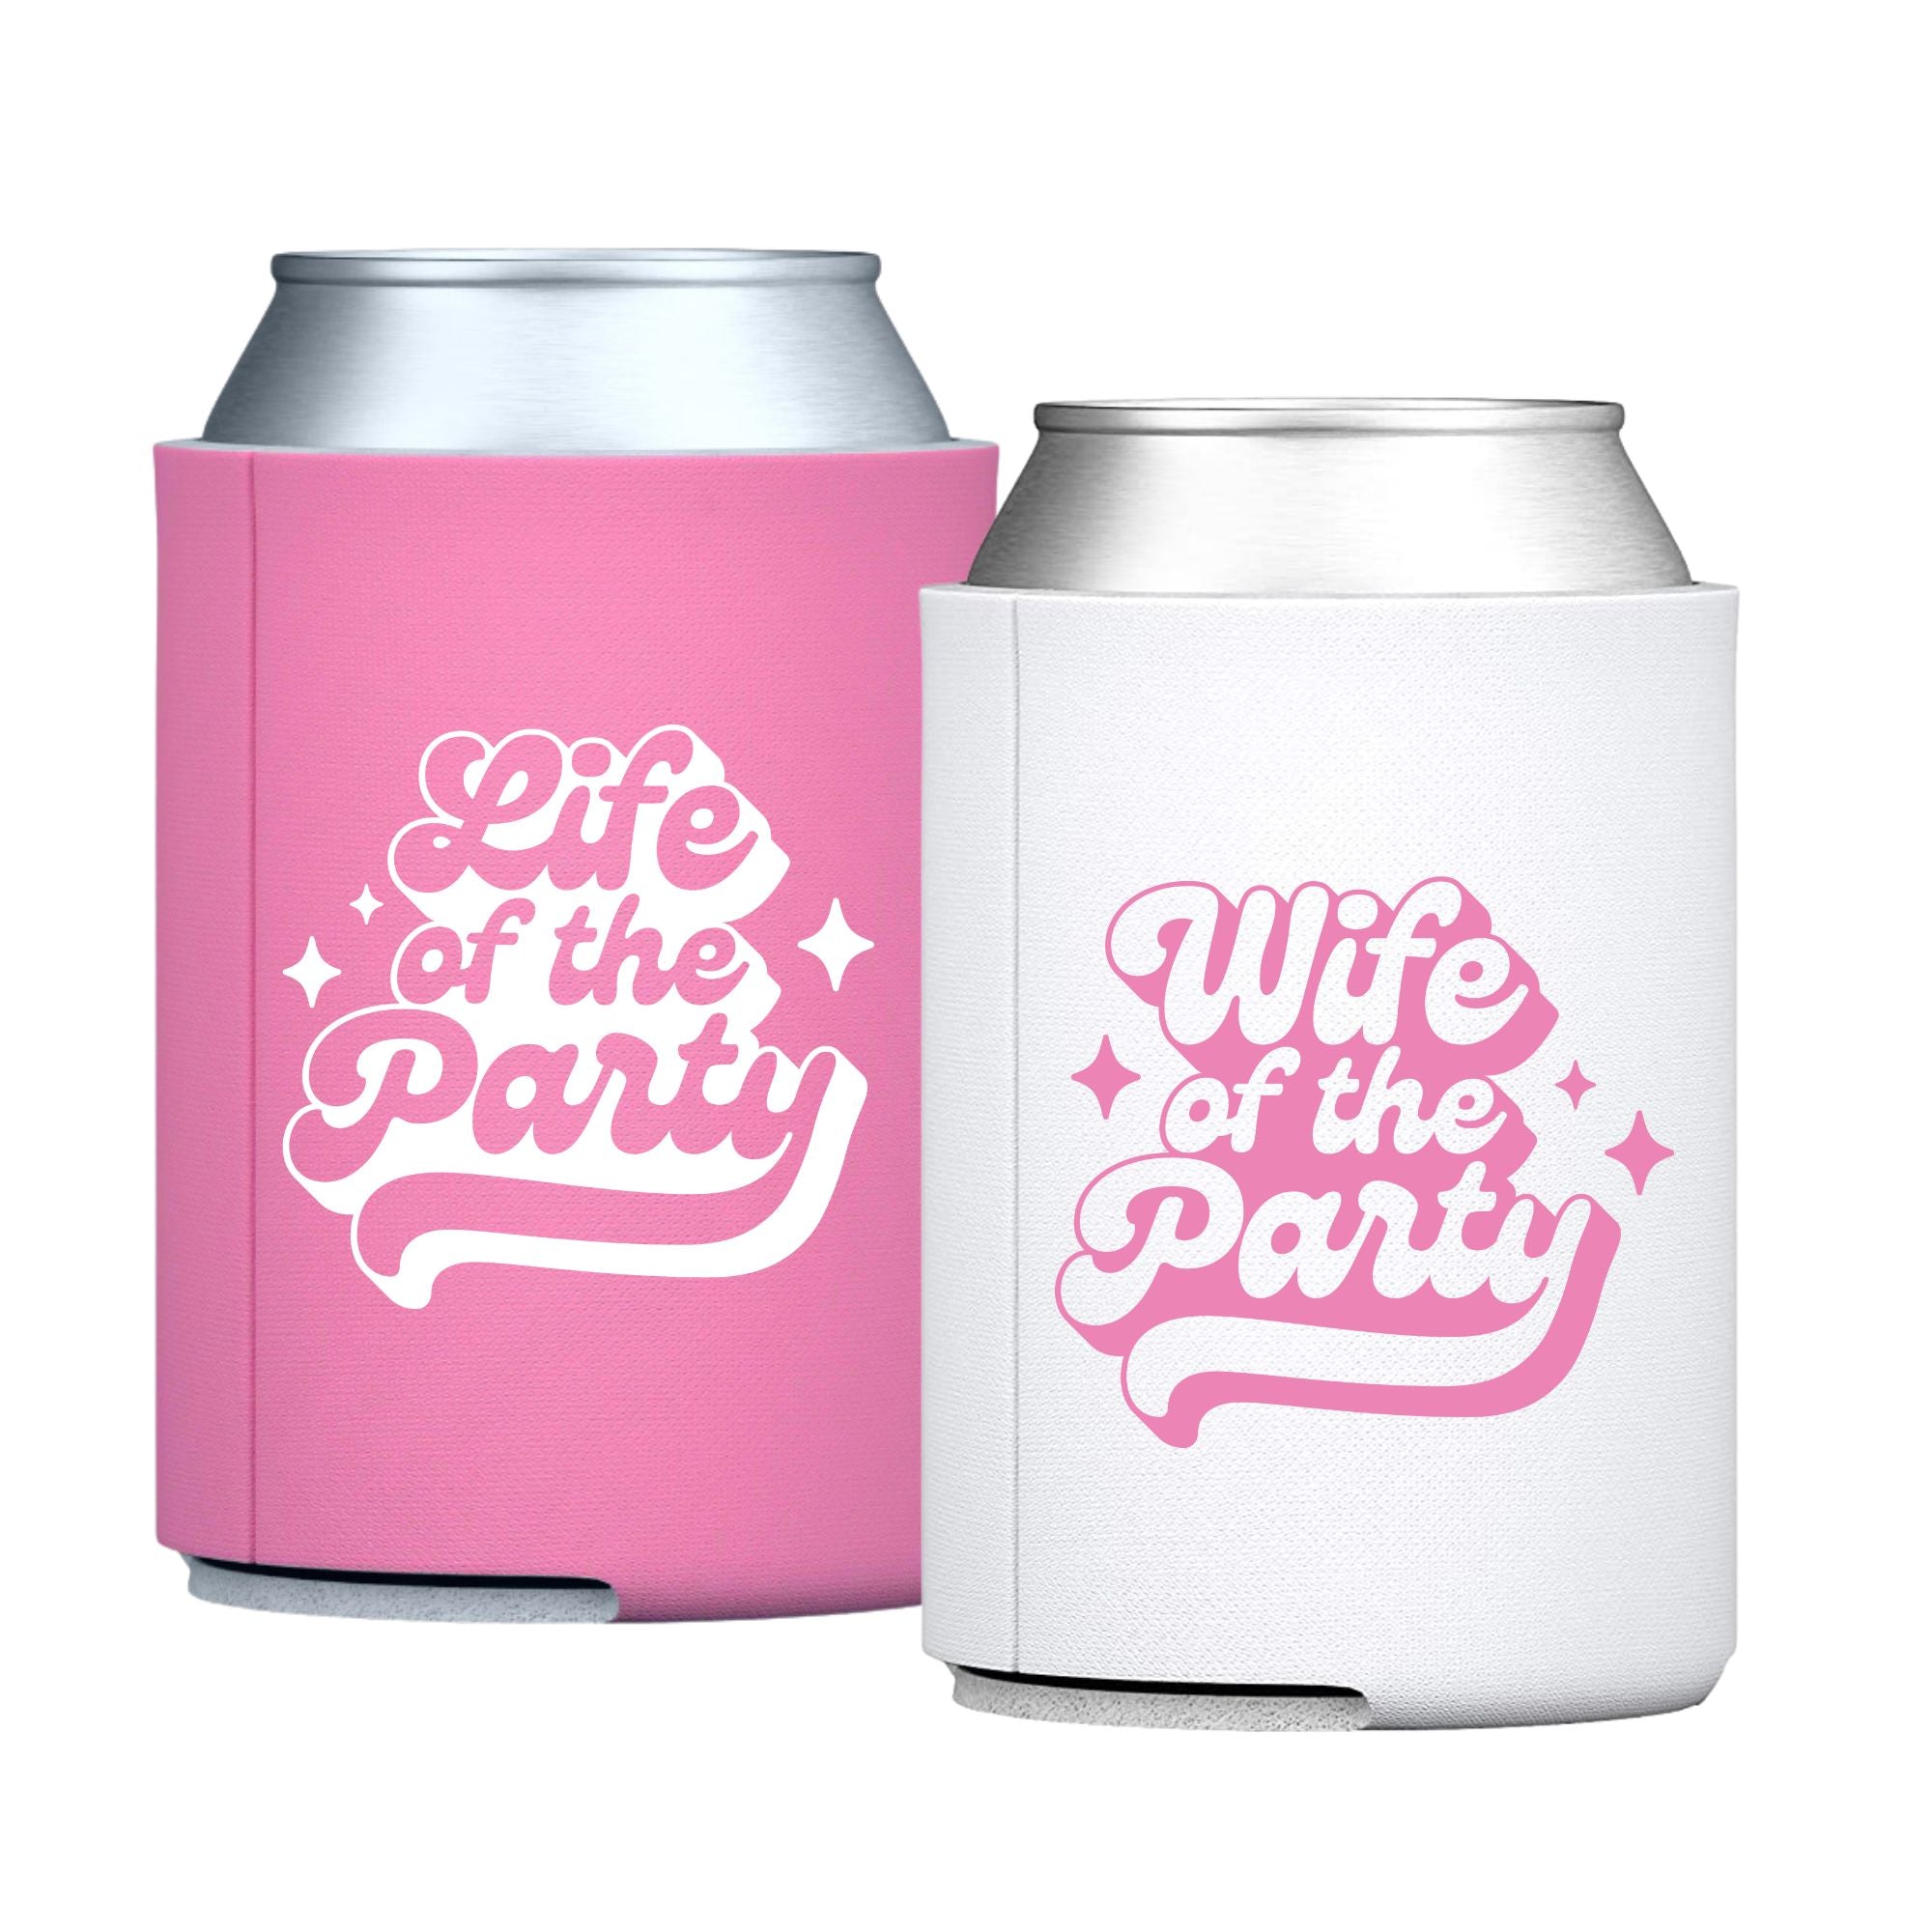 Wife of the Party / Life of the Party Can Cooler - Sprinkled With Pink #bachelorette #custom #gifts